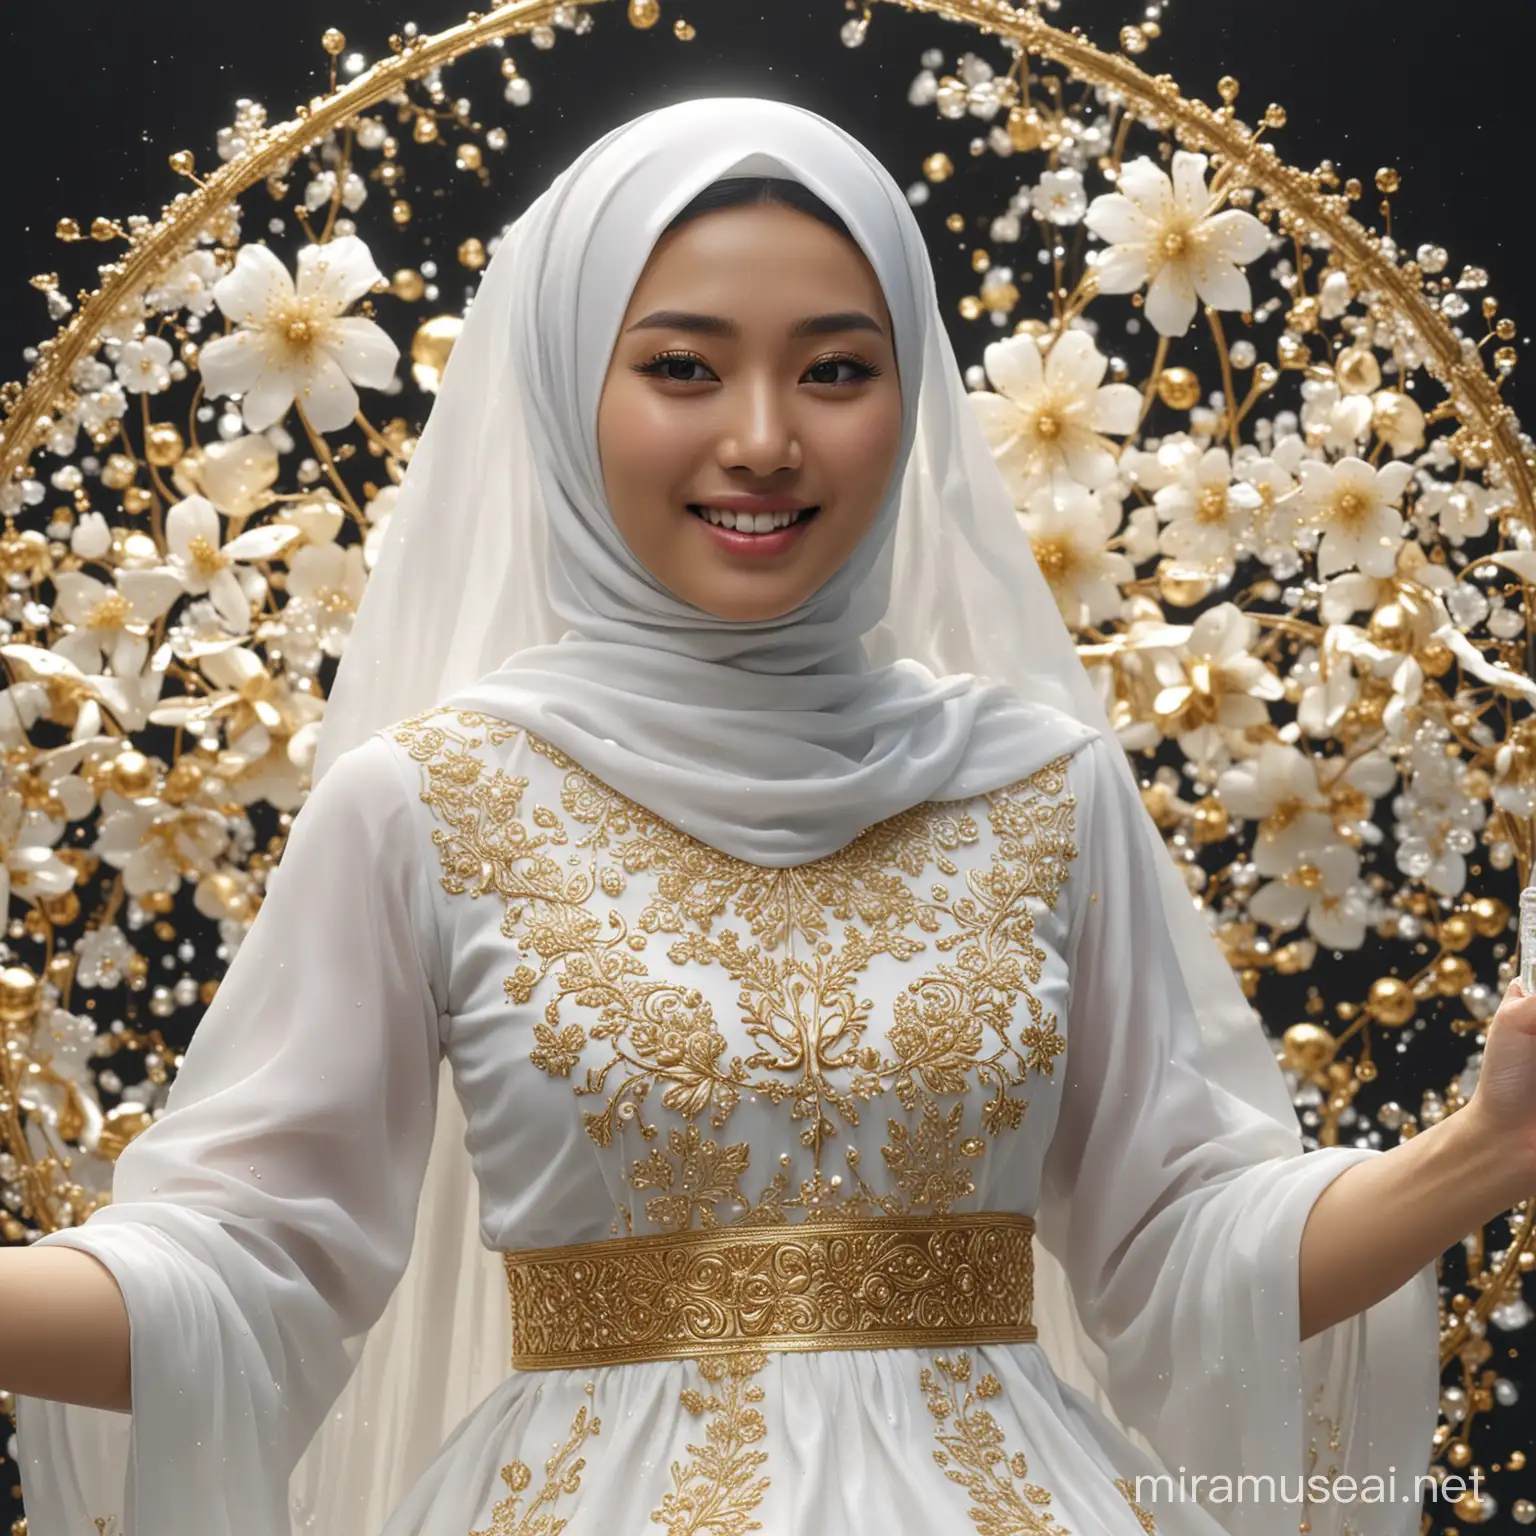 super ultra hyper extreme amazing detailed and realistic BECAK text name that says very detailed "SICBA MUDIK" lights up with white bias gold crome water that says "SICBA MUDIK", extreme flower fractal, mirroring effect photography very clouse up korean beautiful hijab woman smile white dress. holding a miniature BECAK. 4k UHD